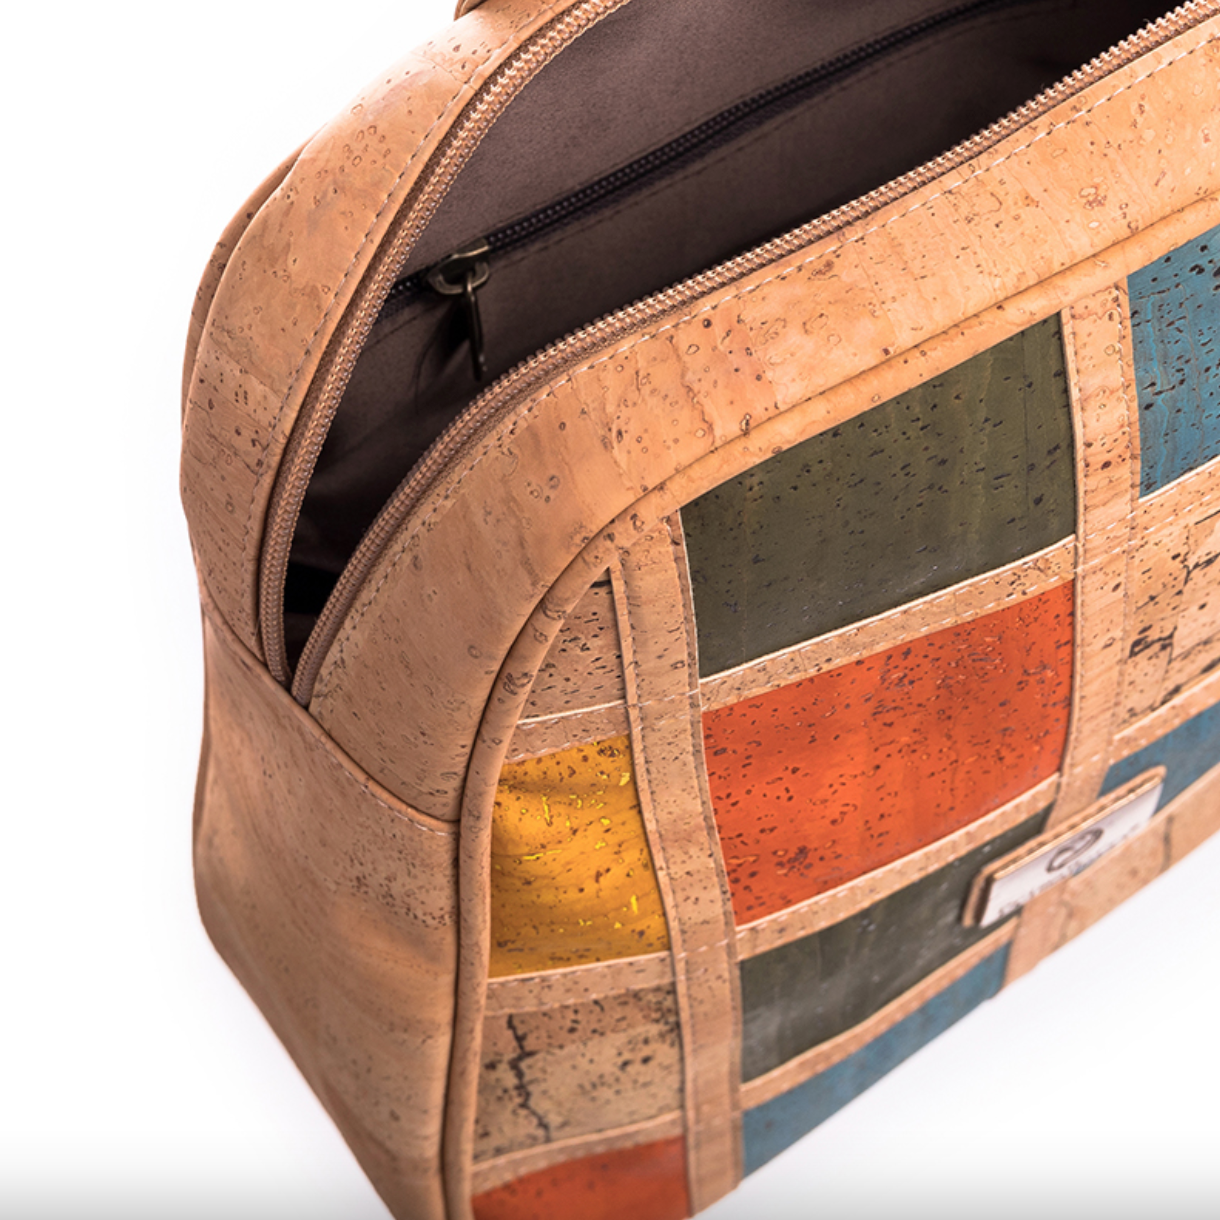 Diversity Cork Crossbody Bag: Sustainable and Stylish Bag Made from Premium Portuguese Cork